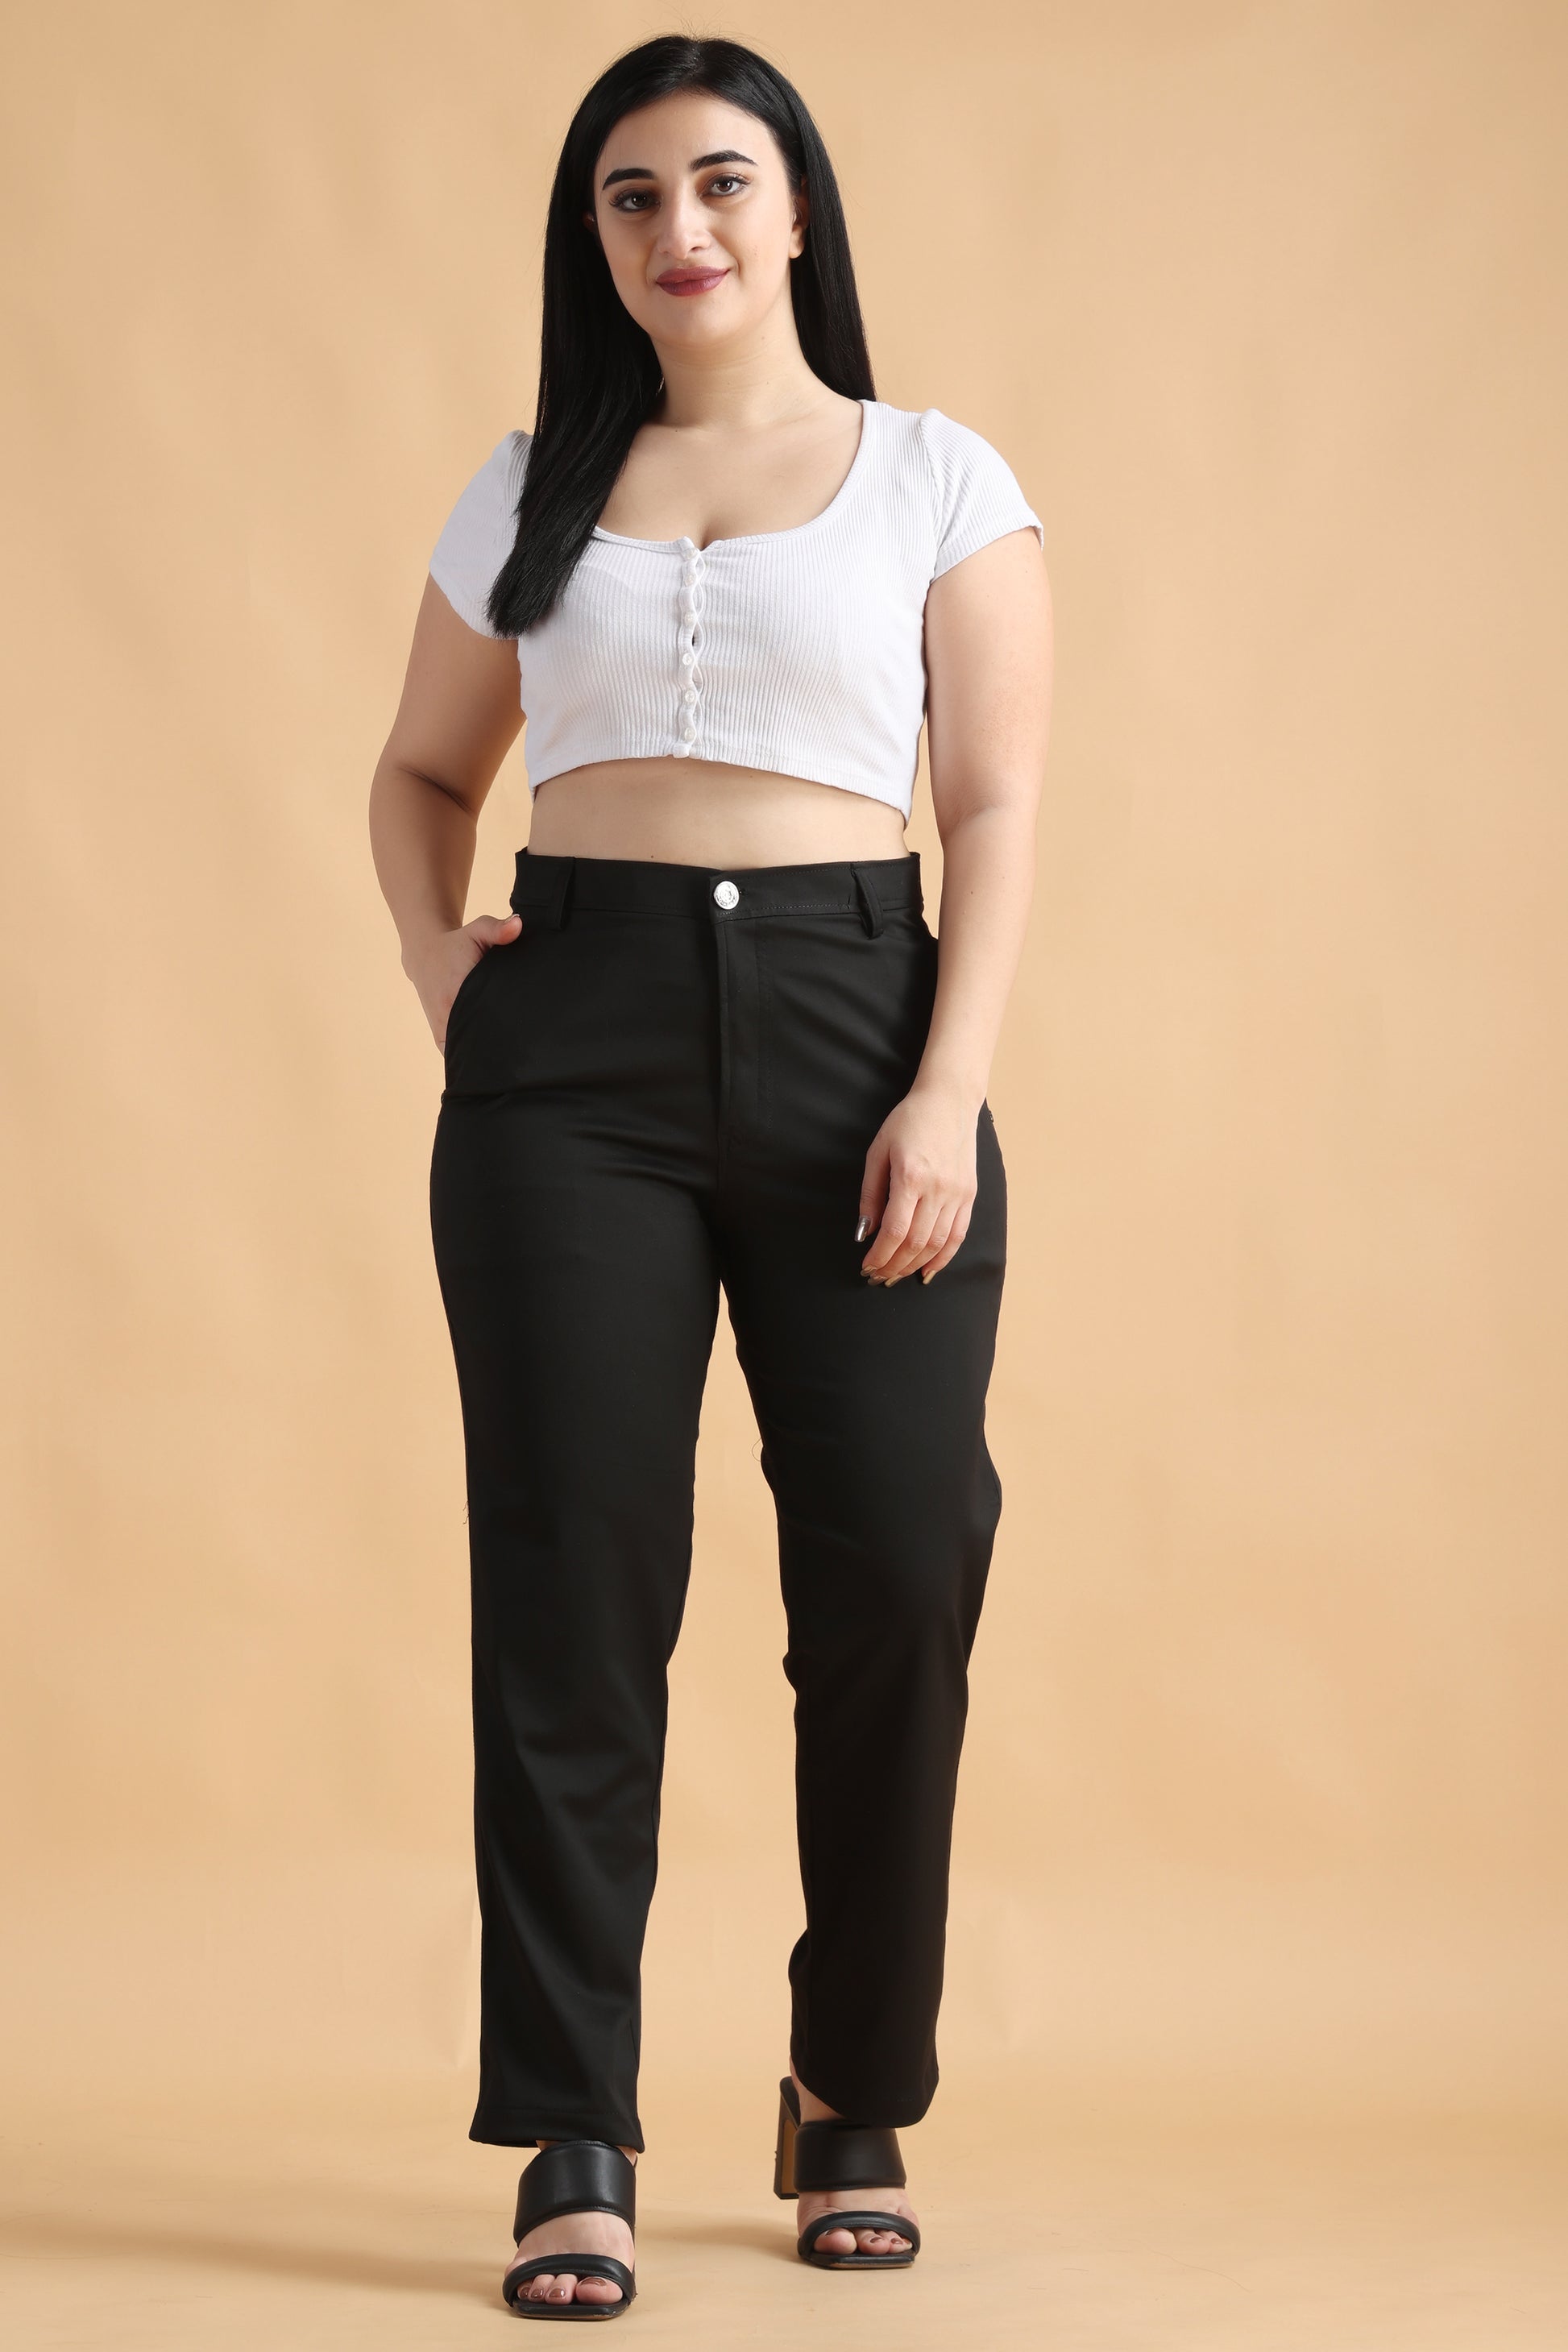 Stretchable Lycra Formal Trousers